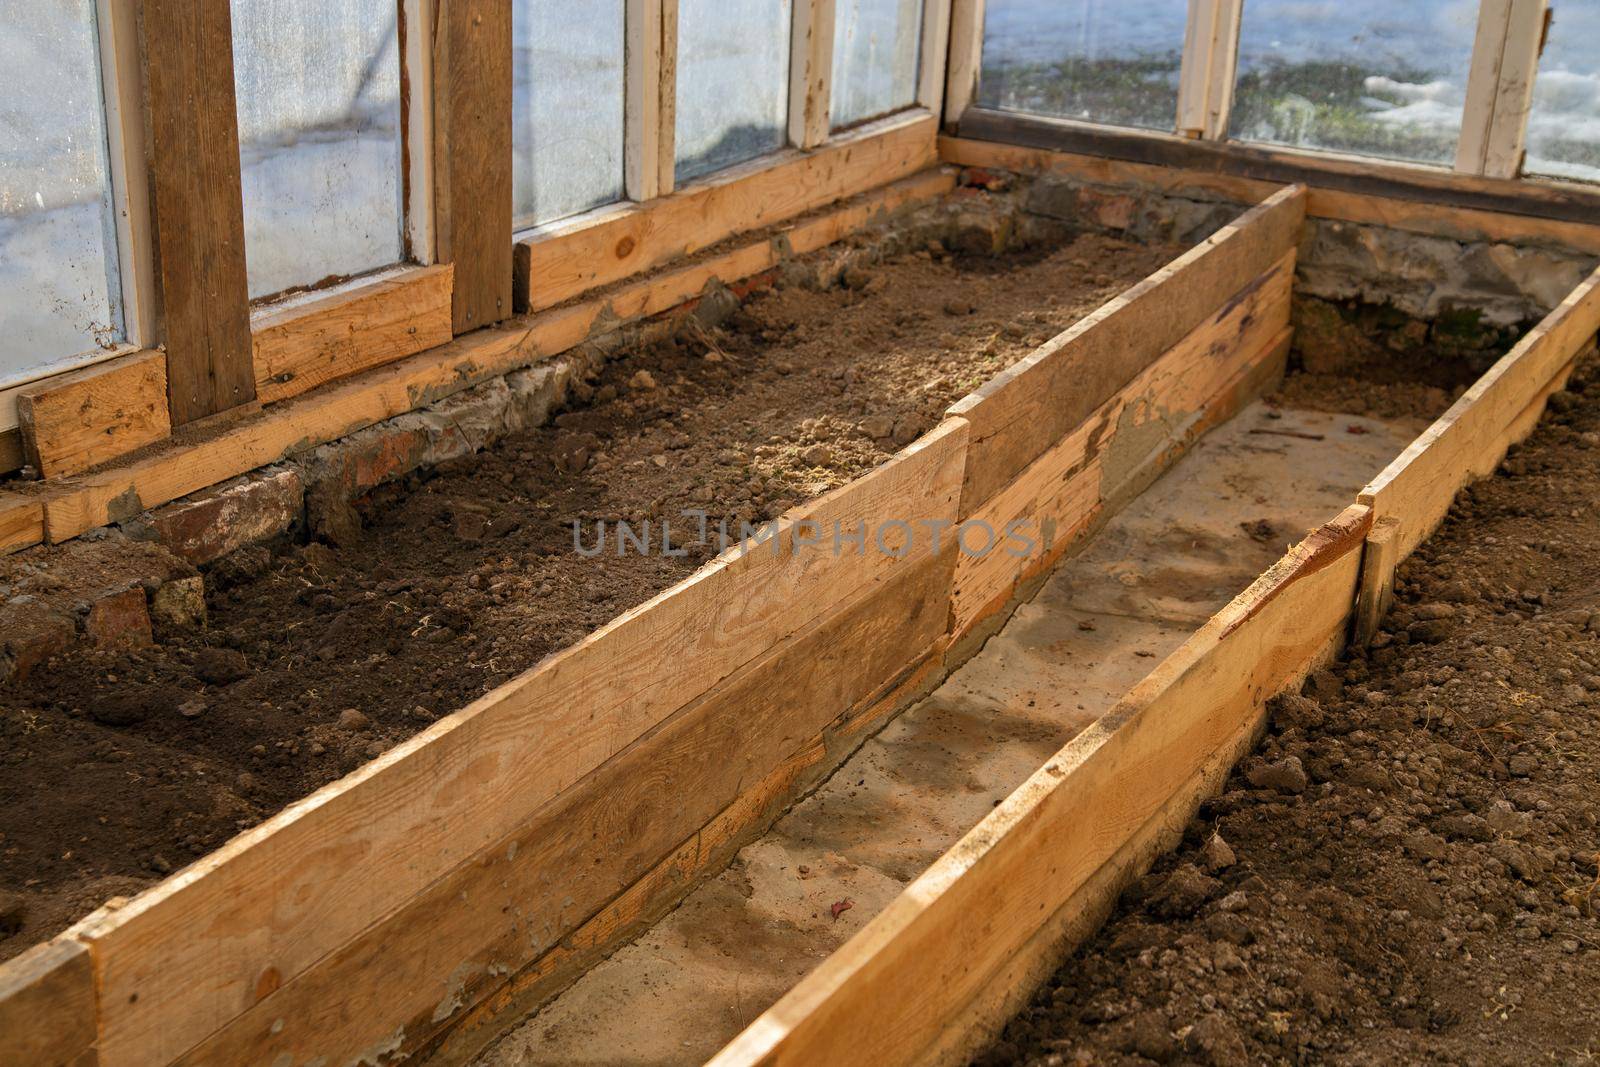 Separated by boards, beds with wet ground in makeshift greenhouse by Sestra